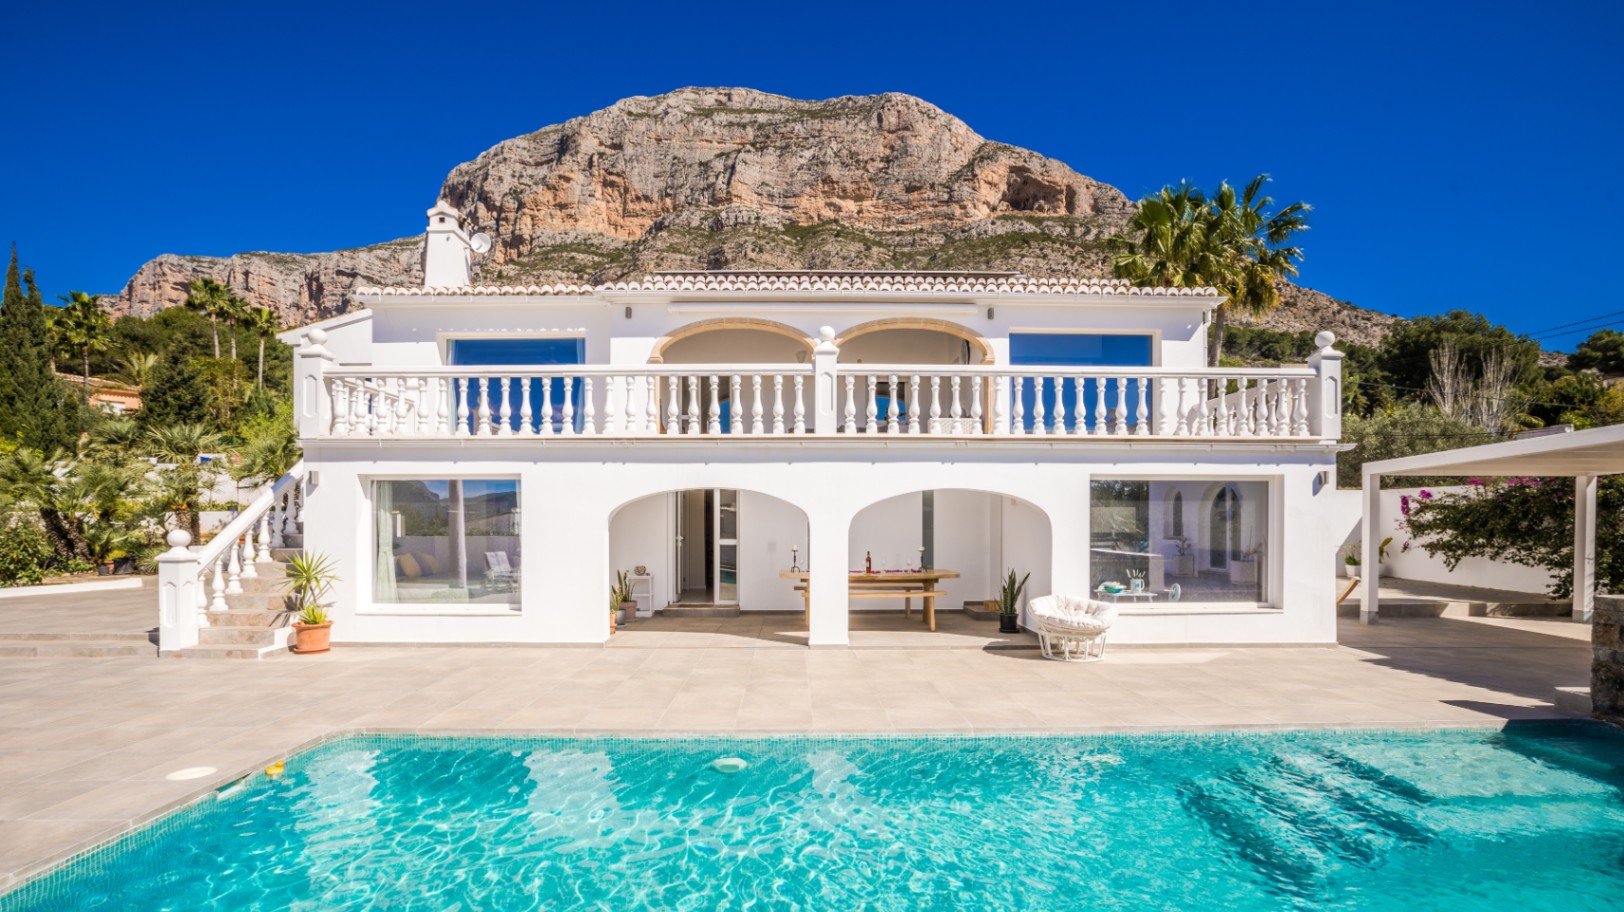 Spectacular and luxurious Villa in the Montgo